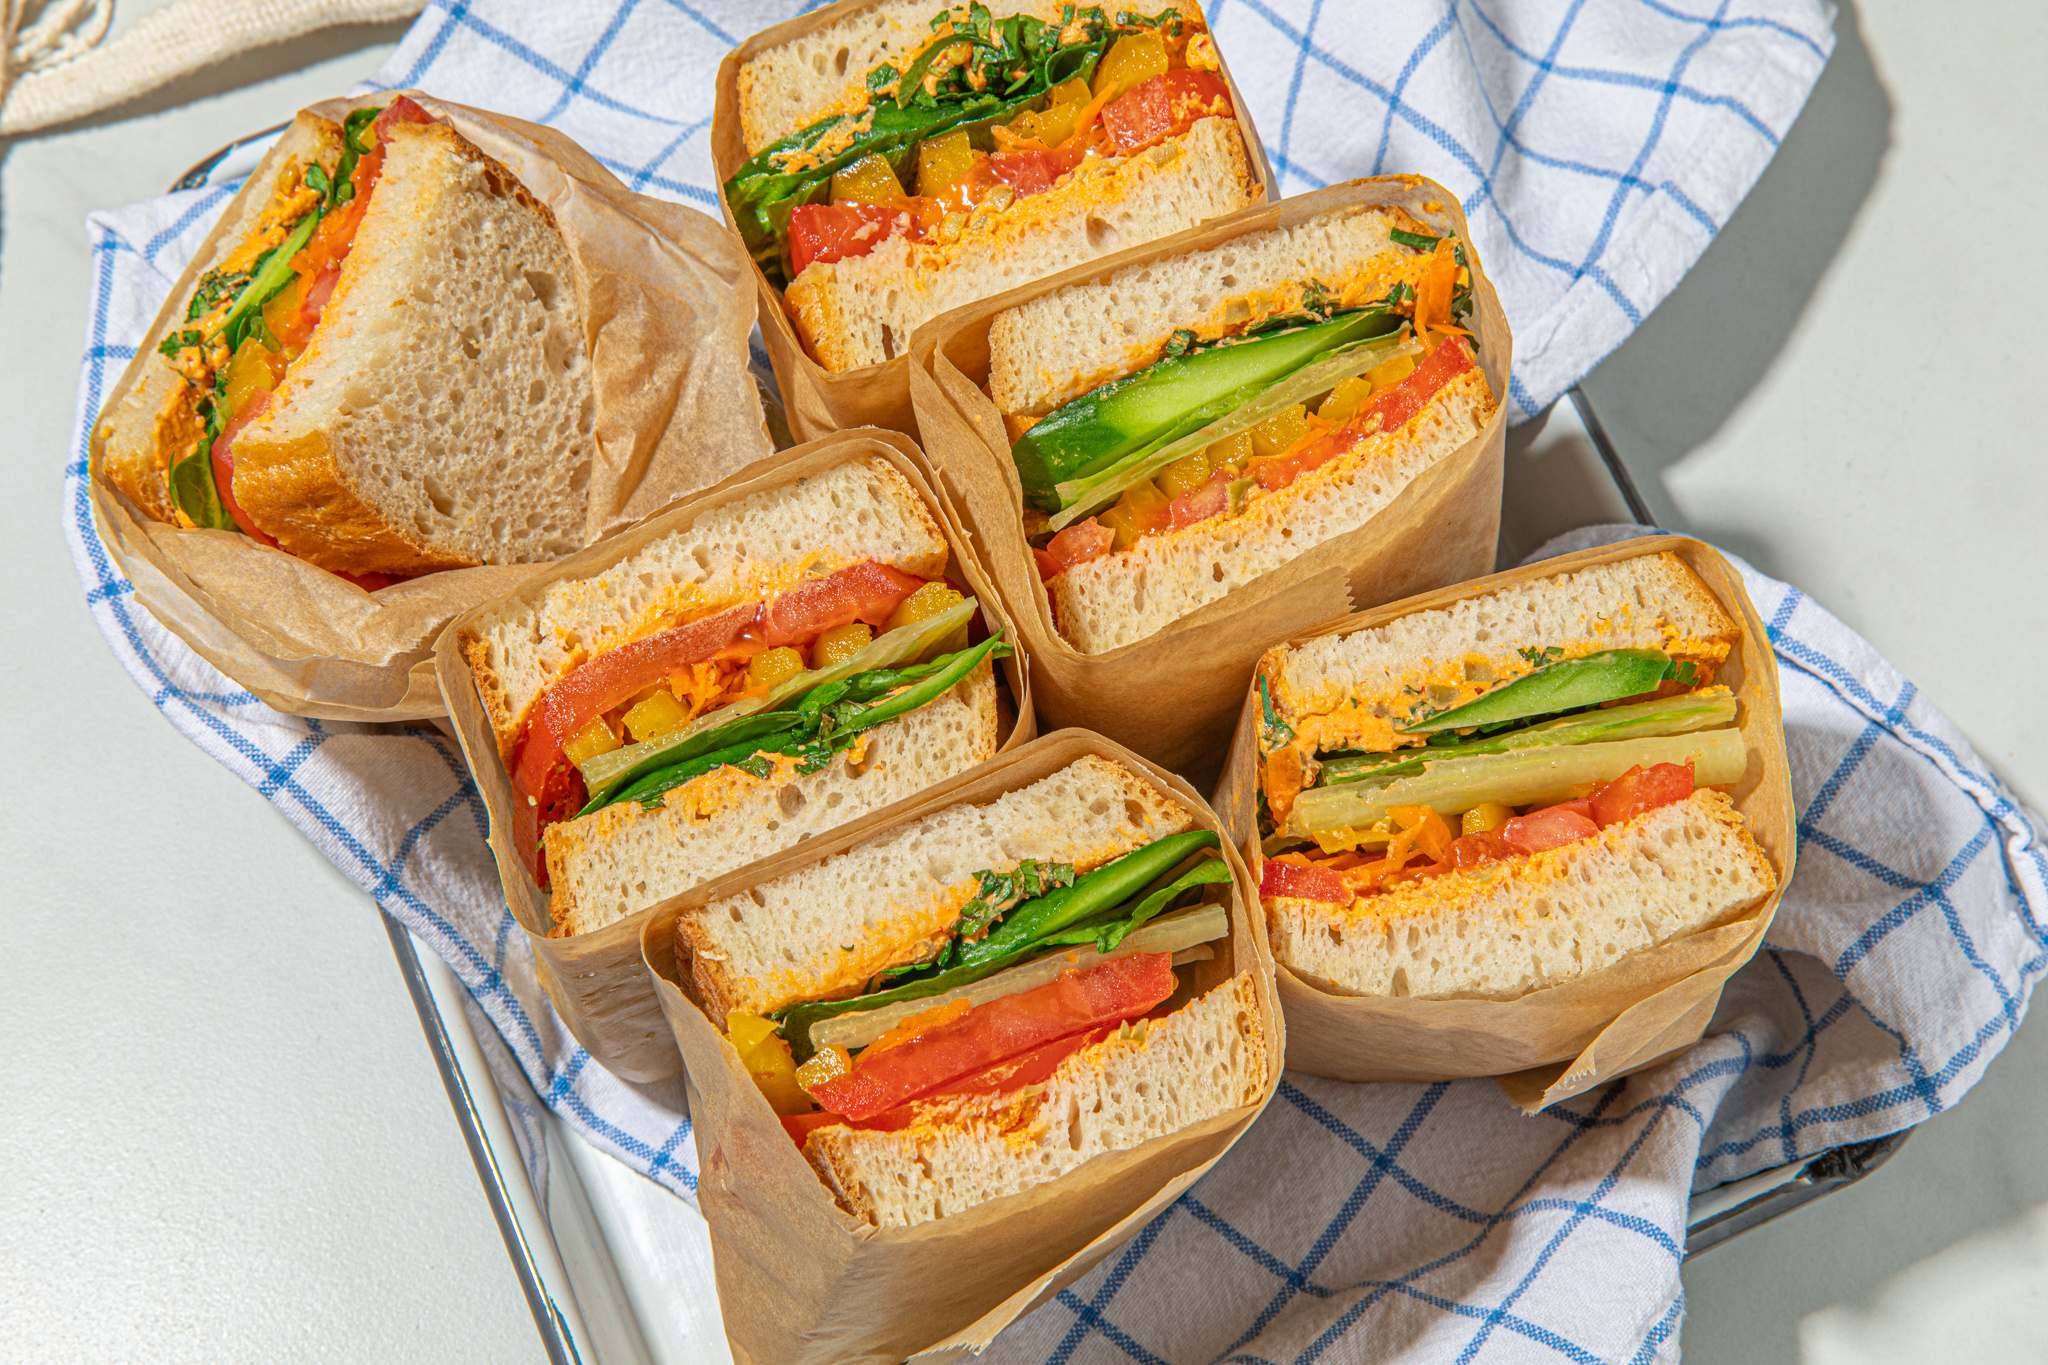 Sandwich: Wrapped in paper or placed in containers for ease of transportation. 2050x1370 HD Wallpaper.